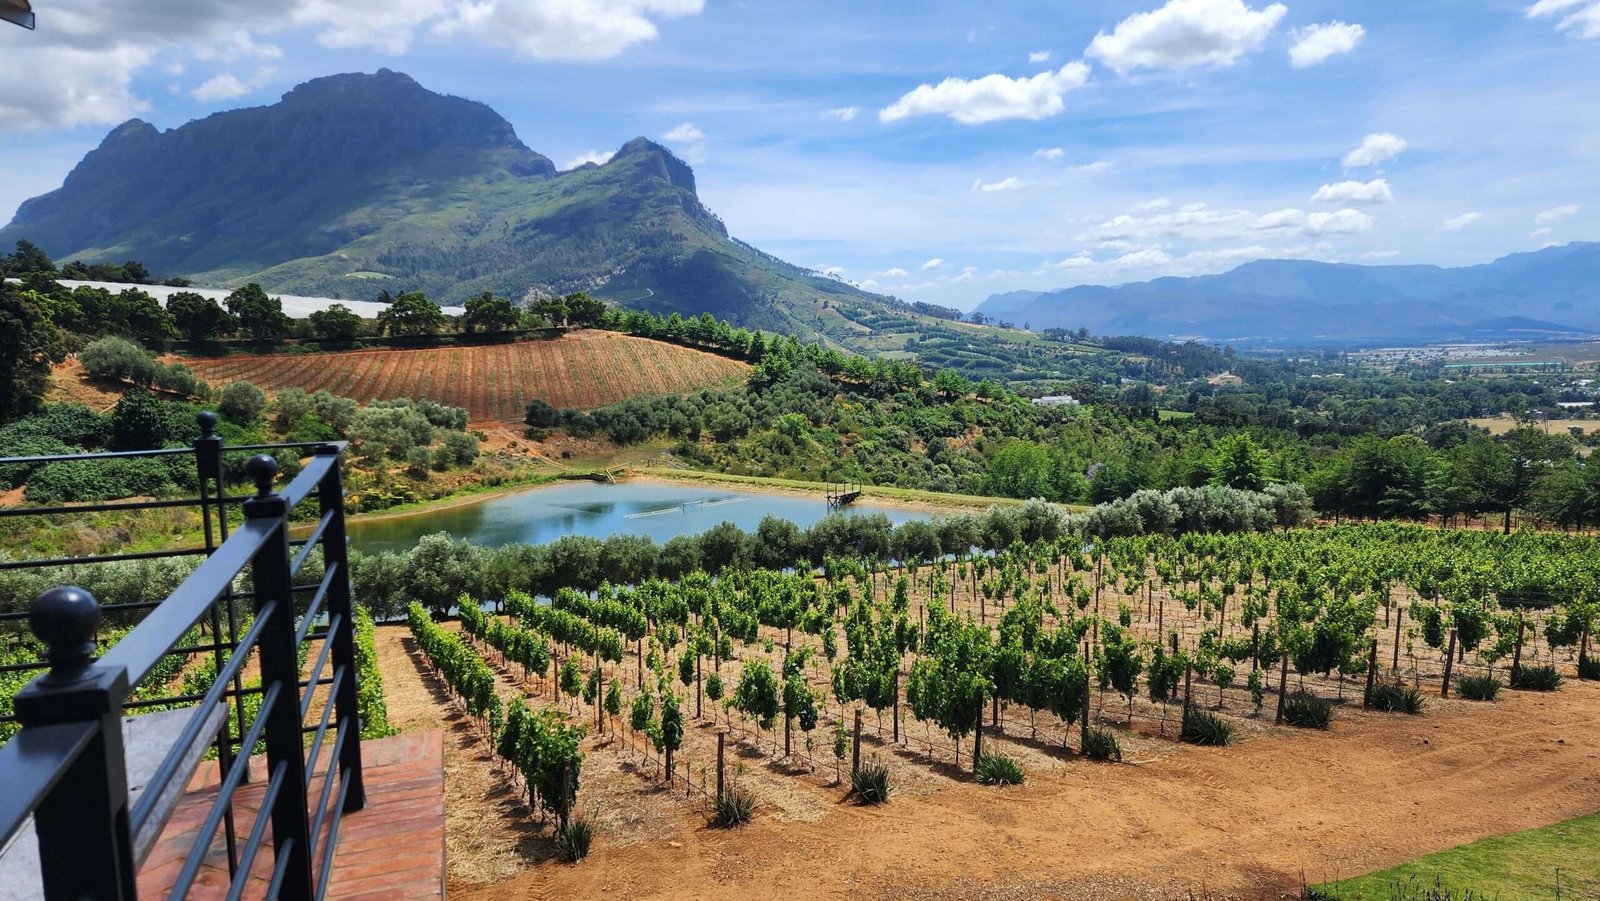 How to spend three days touring wineries around Capetown, South Africa